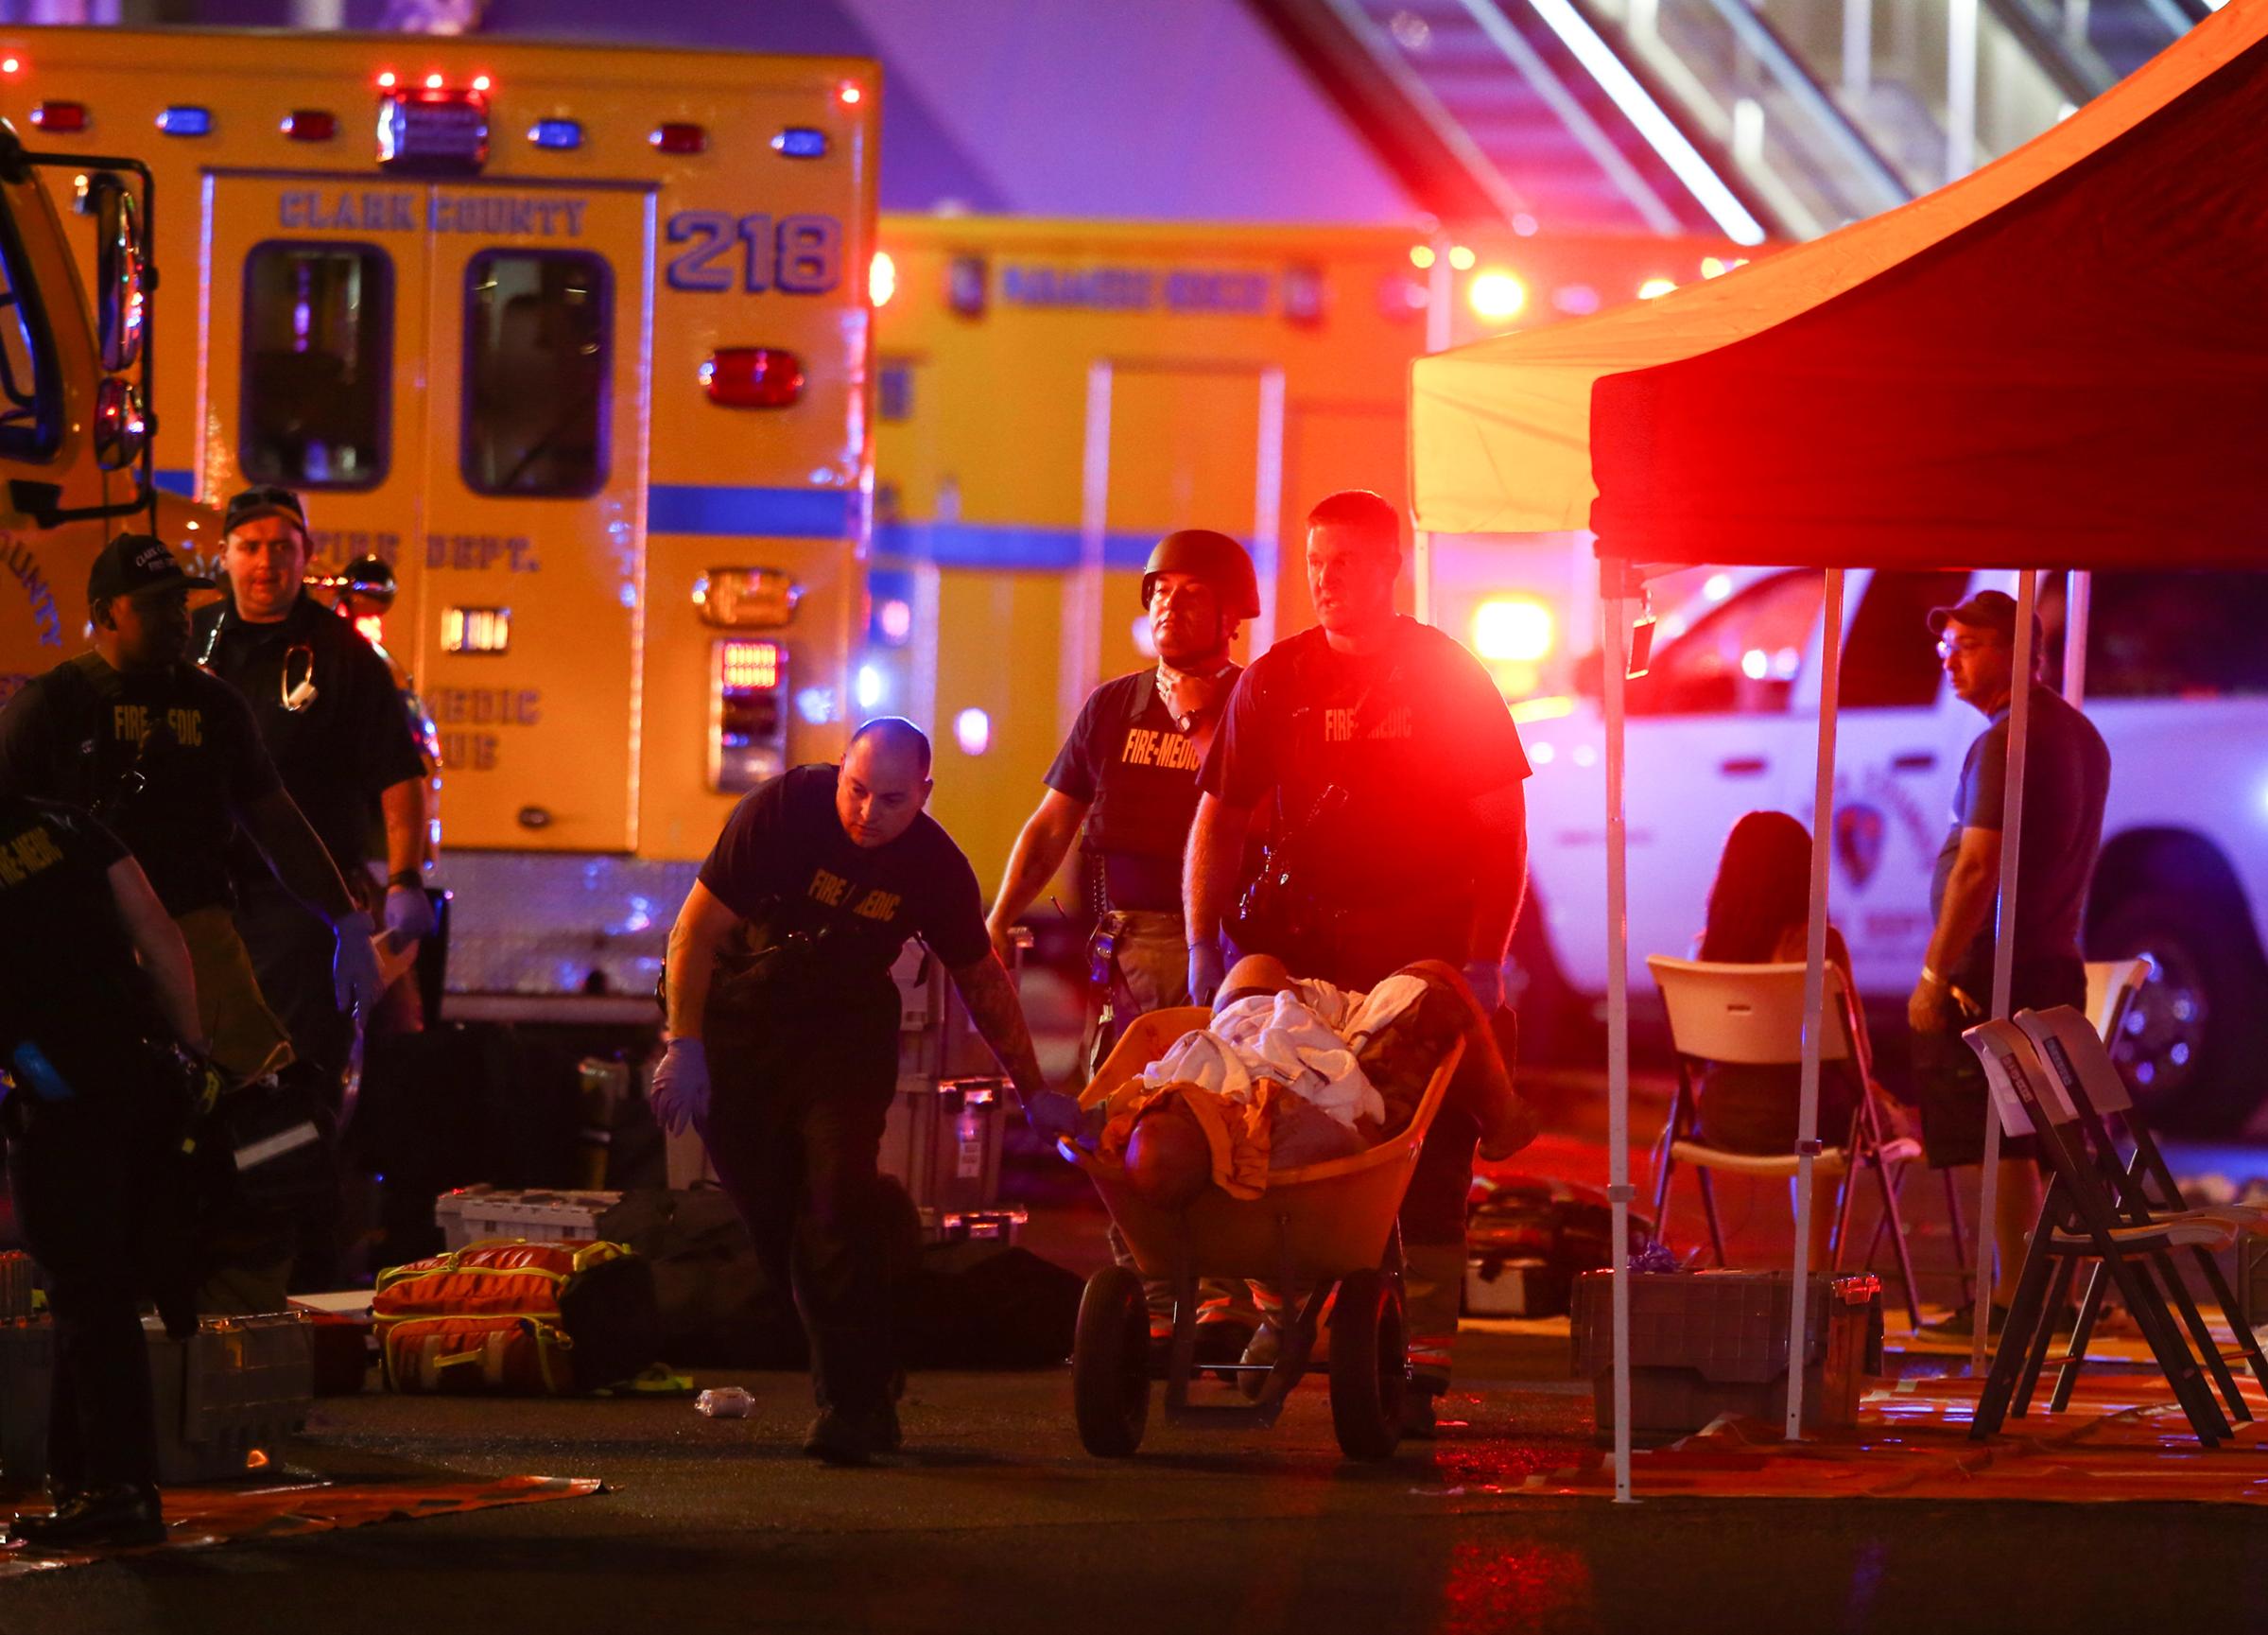 A wounded person is transported in a wheelbarrow after a mass shooting at a music festival in Las Vegas on Oct. 1, 2017.